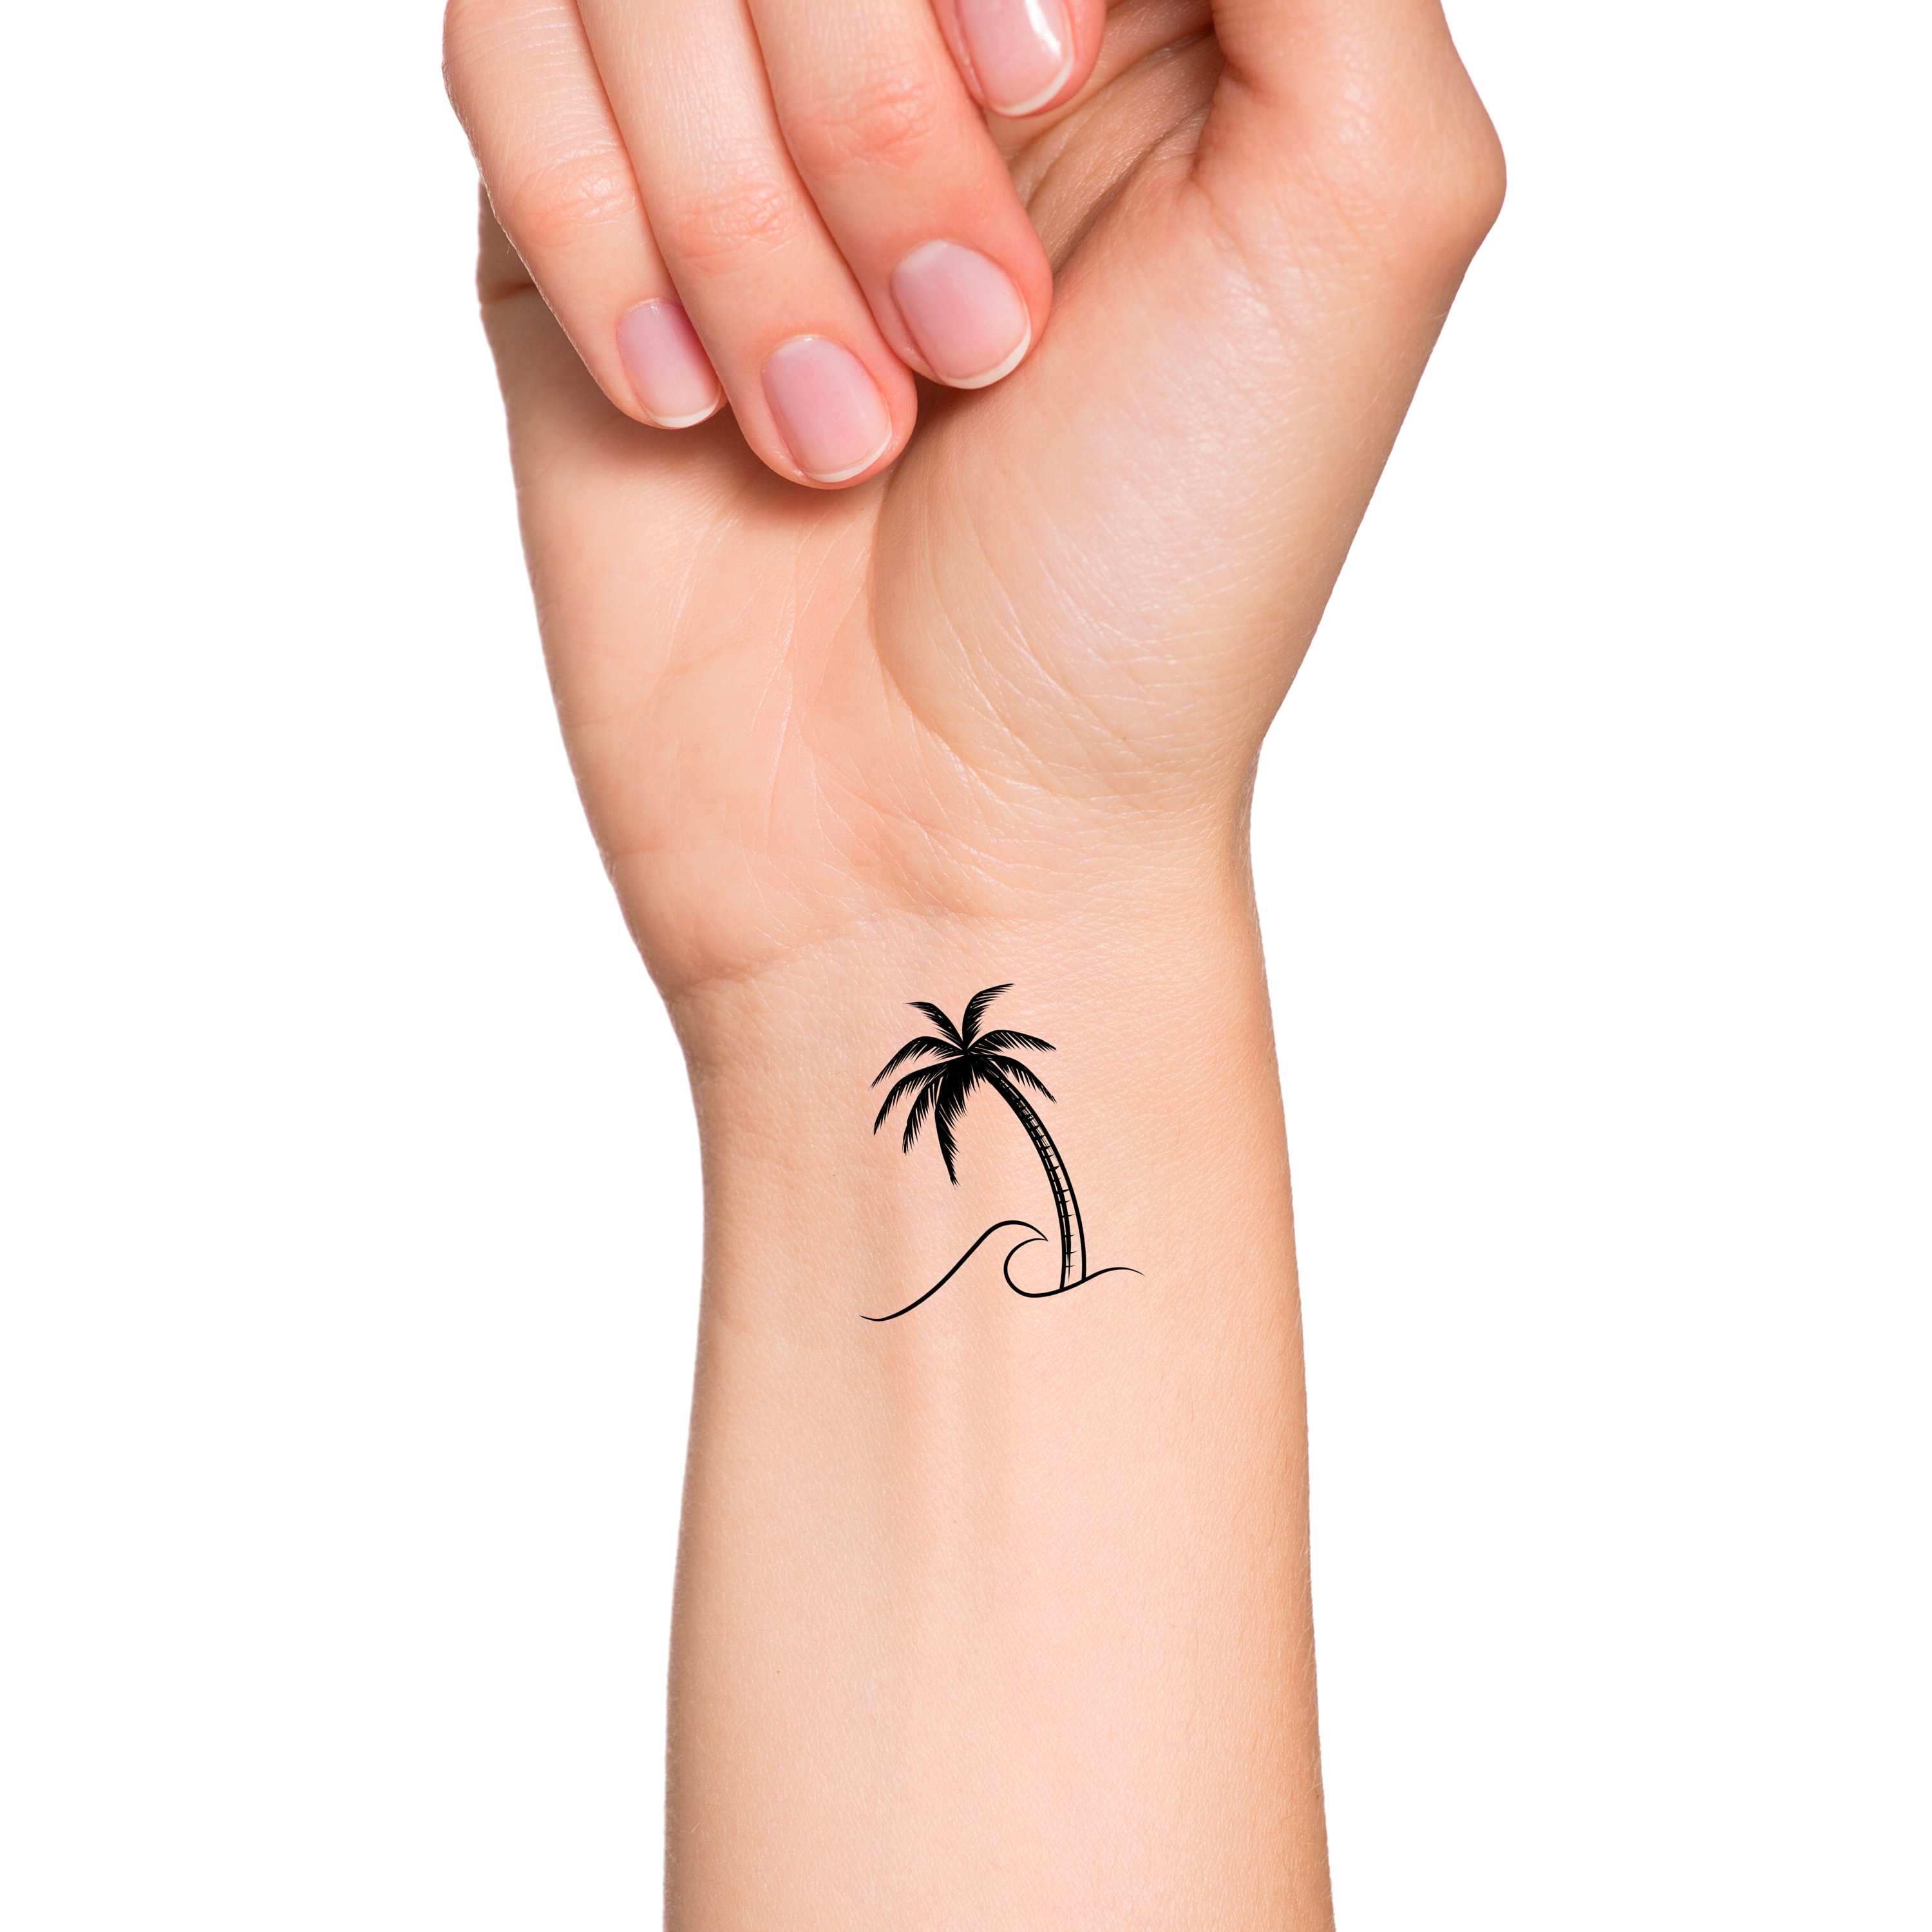 95 Calming Palm Tree Tattoo Ideas With Soothing Visuals